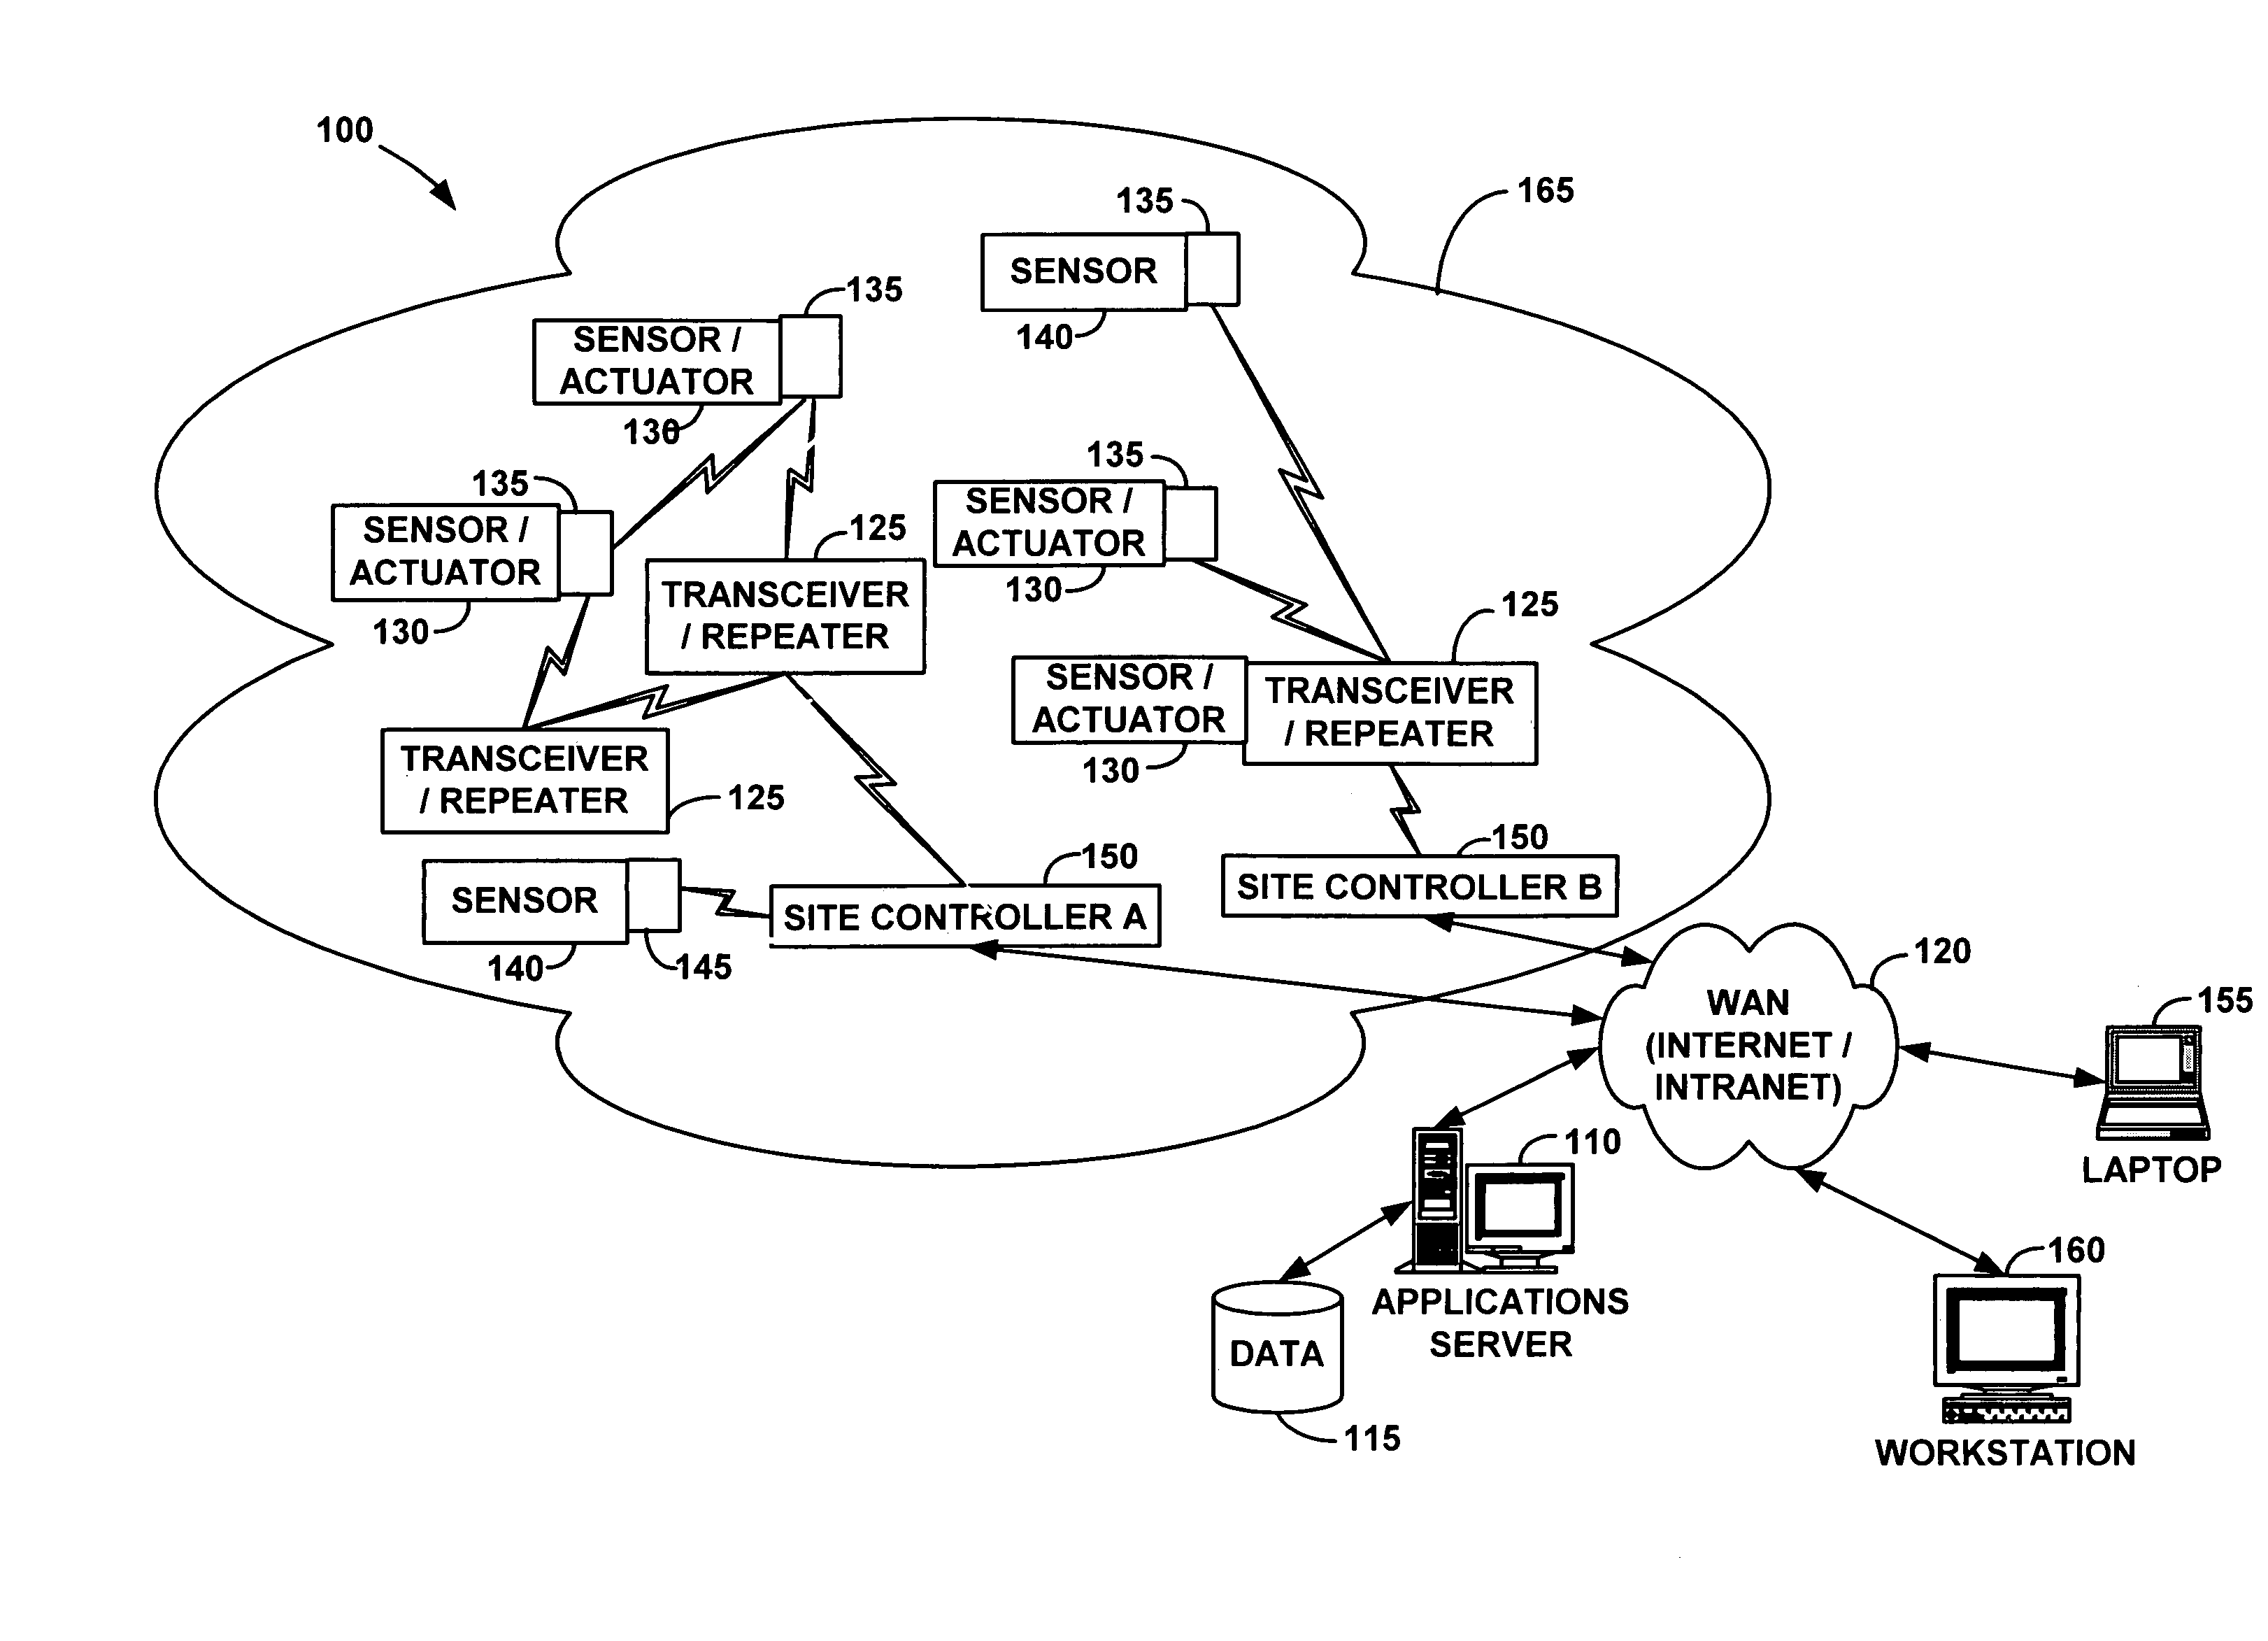 Wireless communication networks for providing remote monitoring of devices